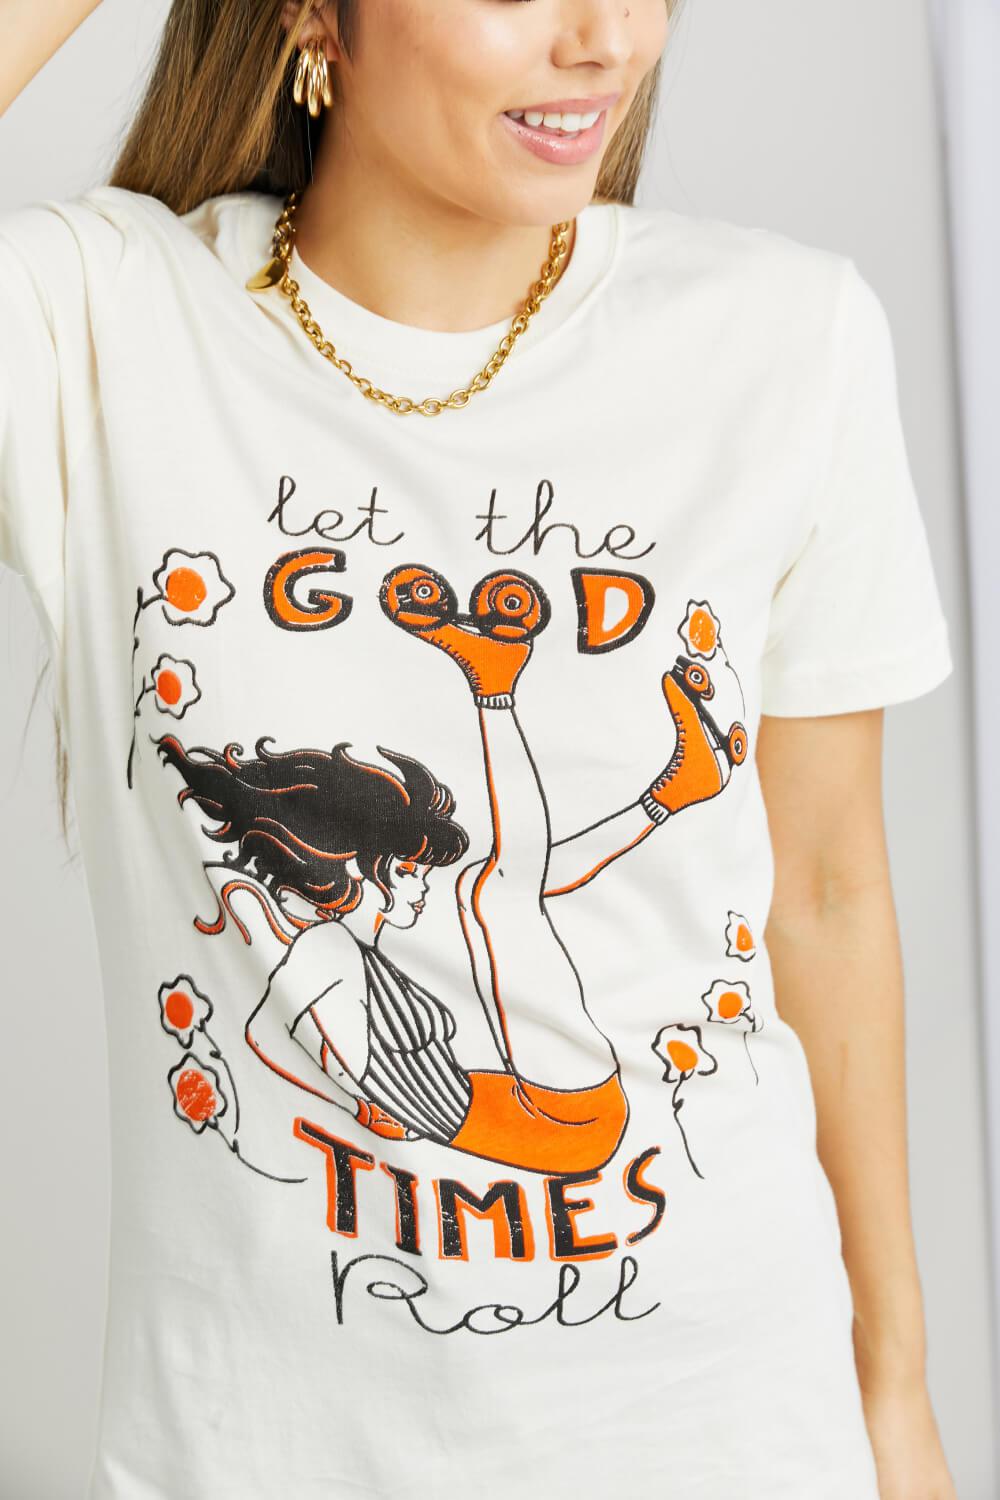 mineB Full Size LET THE GOOD TIMES ROLL Graphic Tee BLUE ZONE PLANET